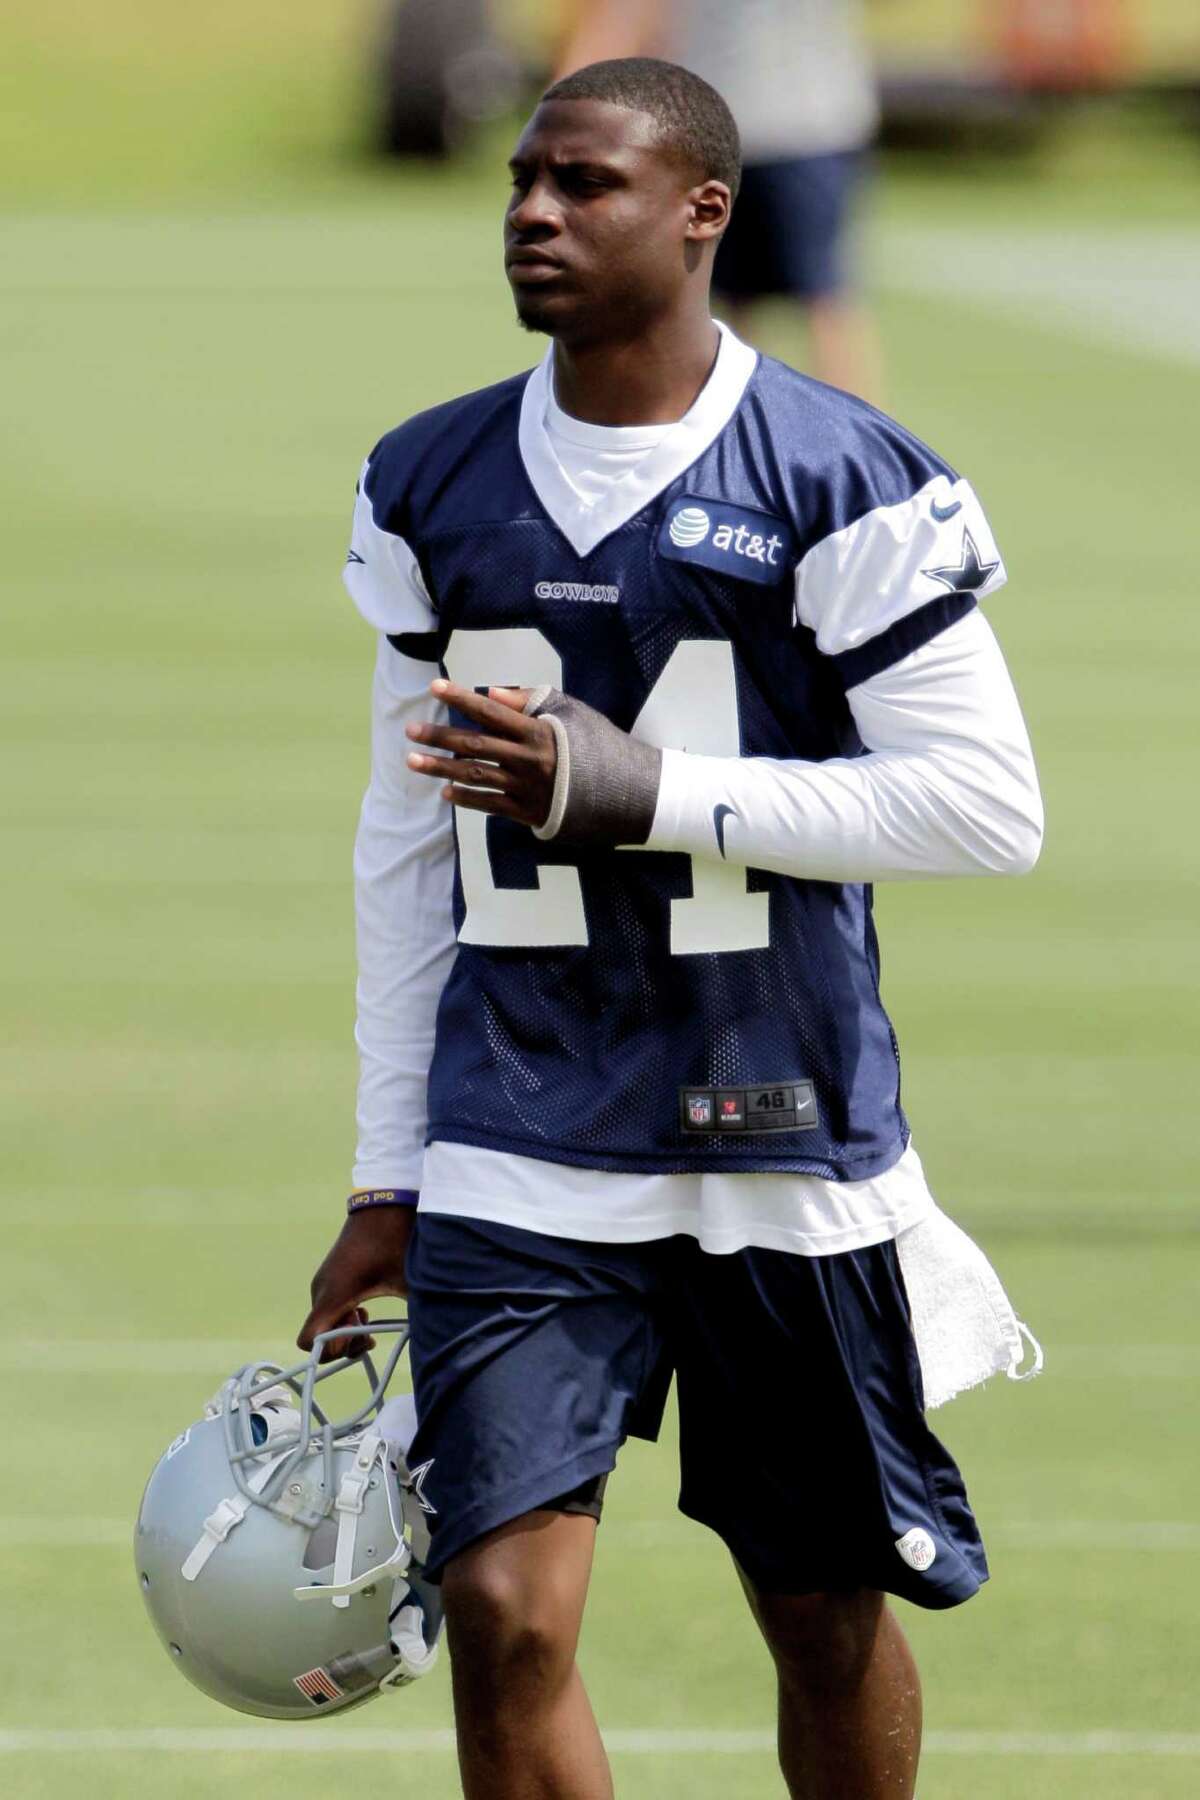 Cowboys' prized rookie ready for first test